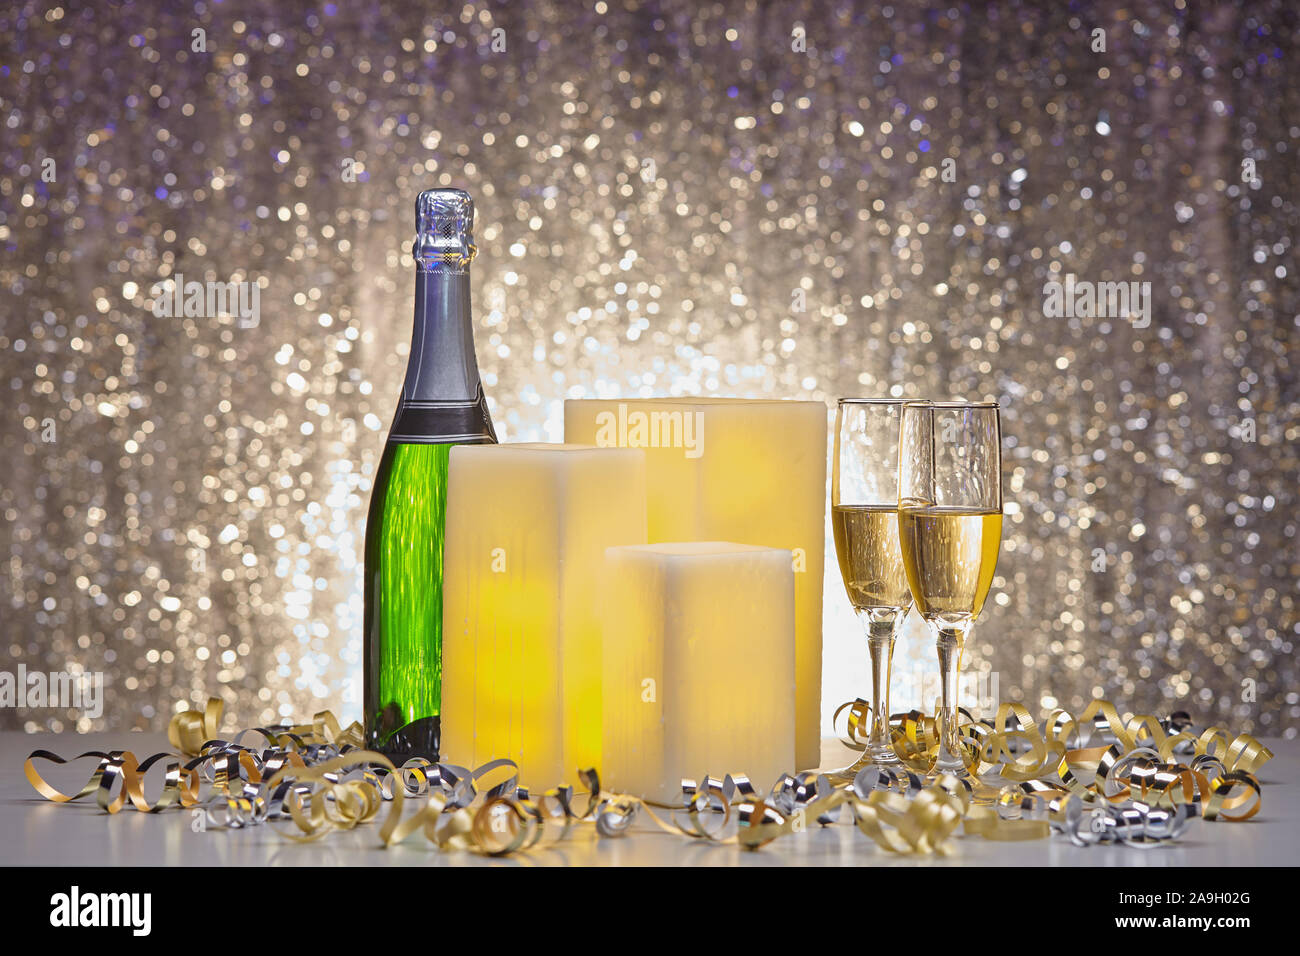 New years eve still life of electric wax candles, flutes of champagne and silver and gold party ribbon Stock Photo